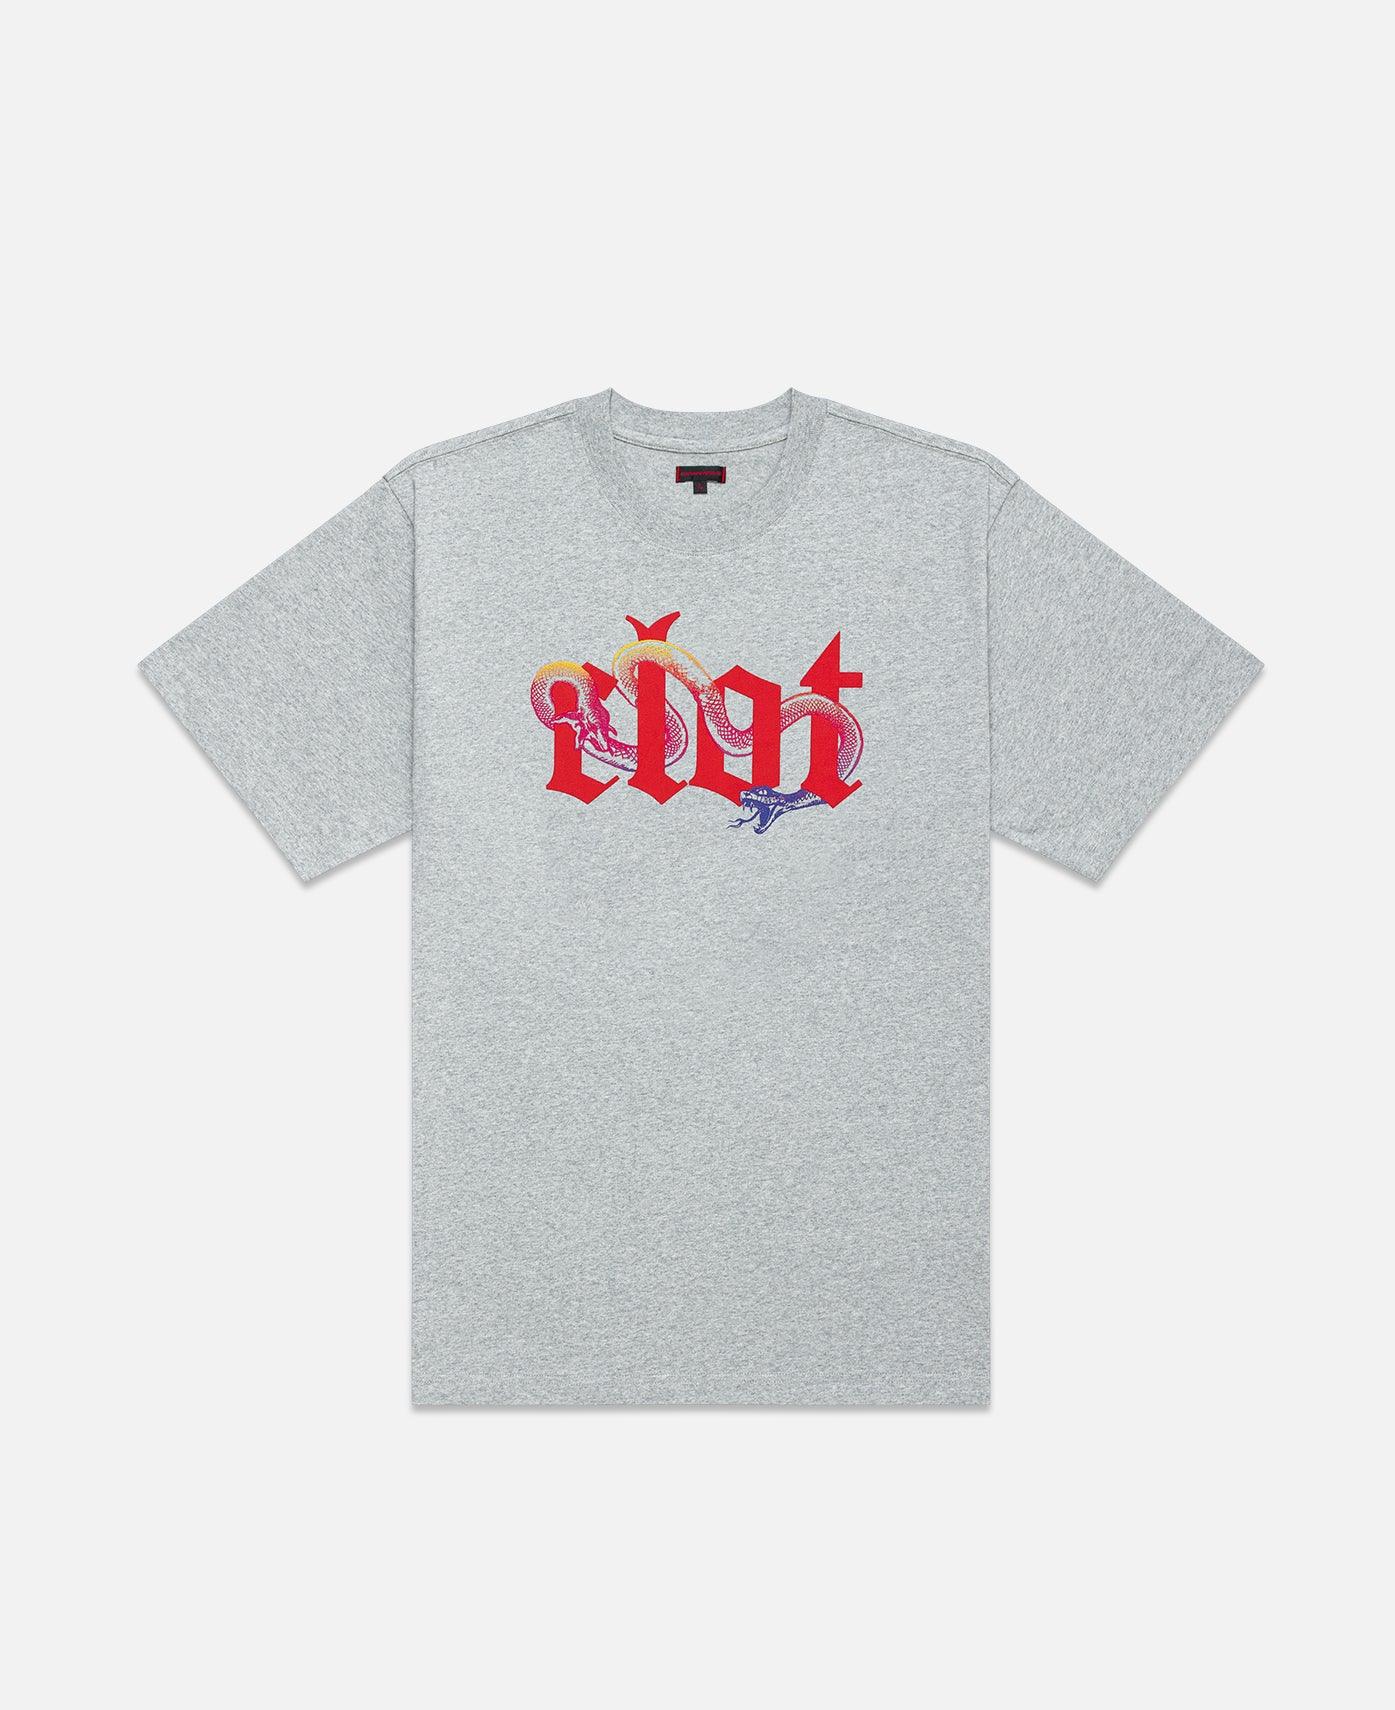 CLOT Snake Logo Tee in Grey front view